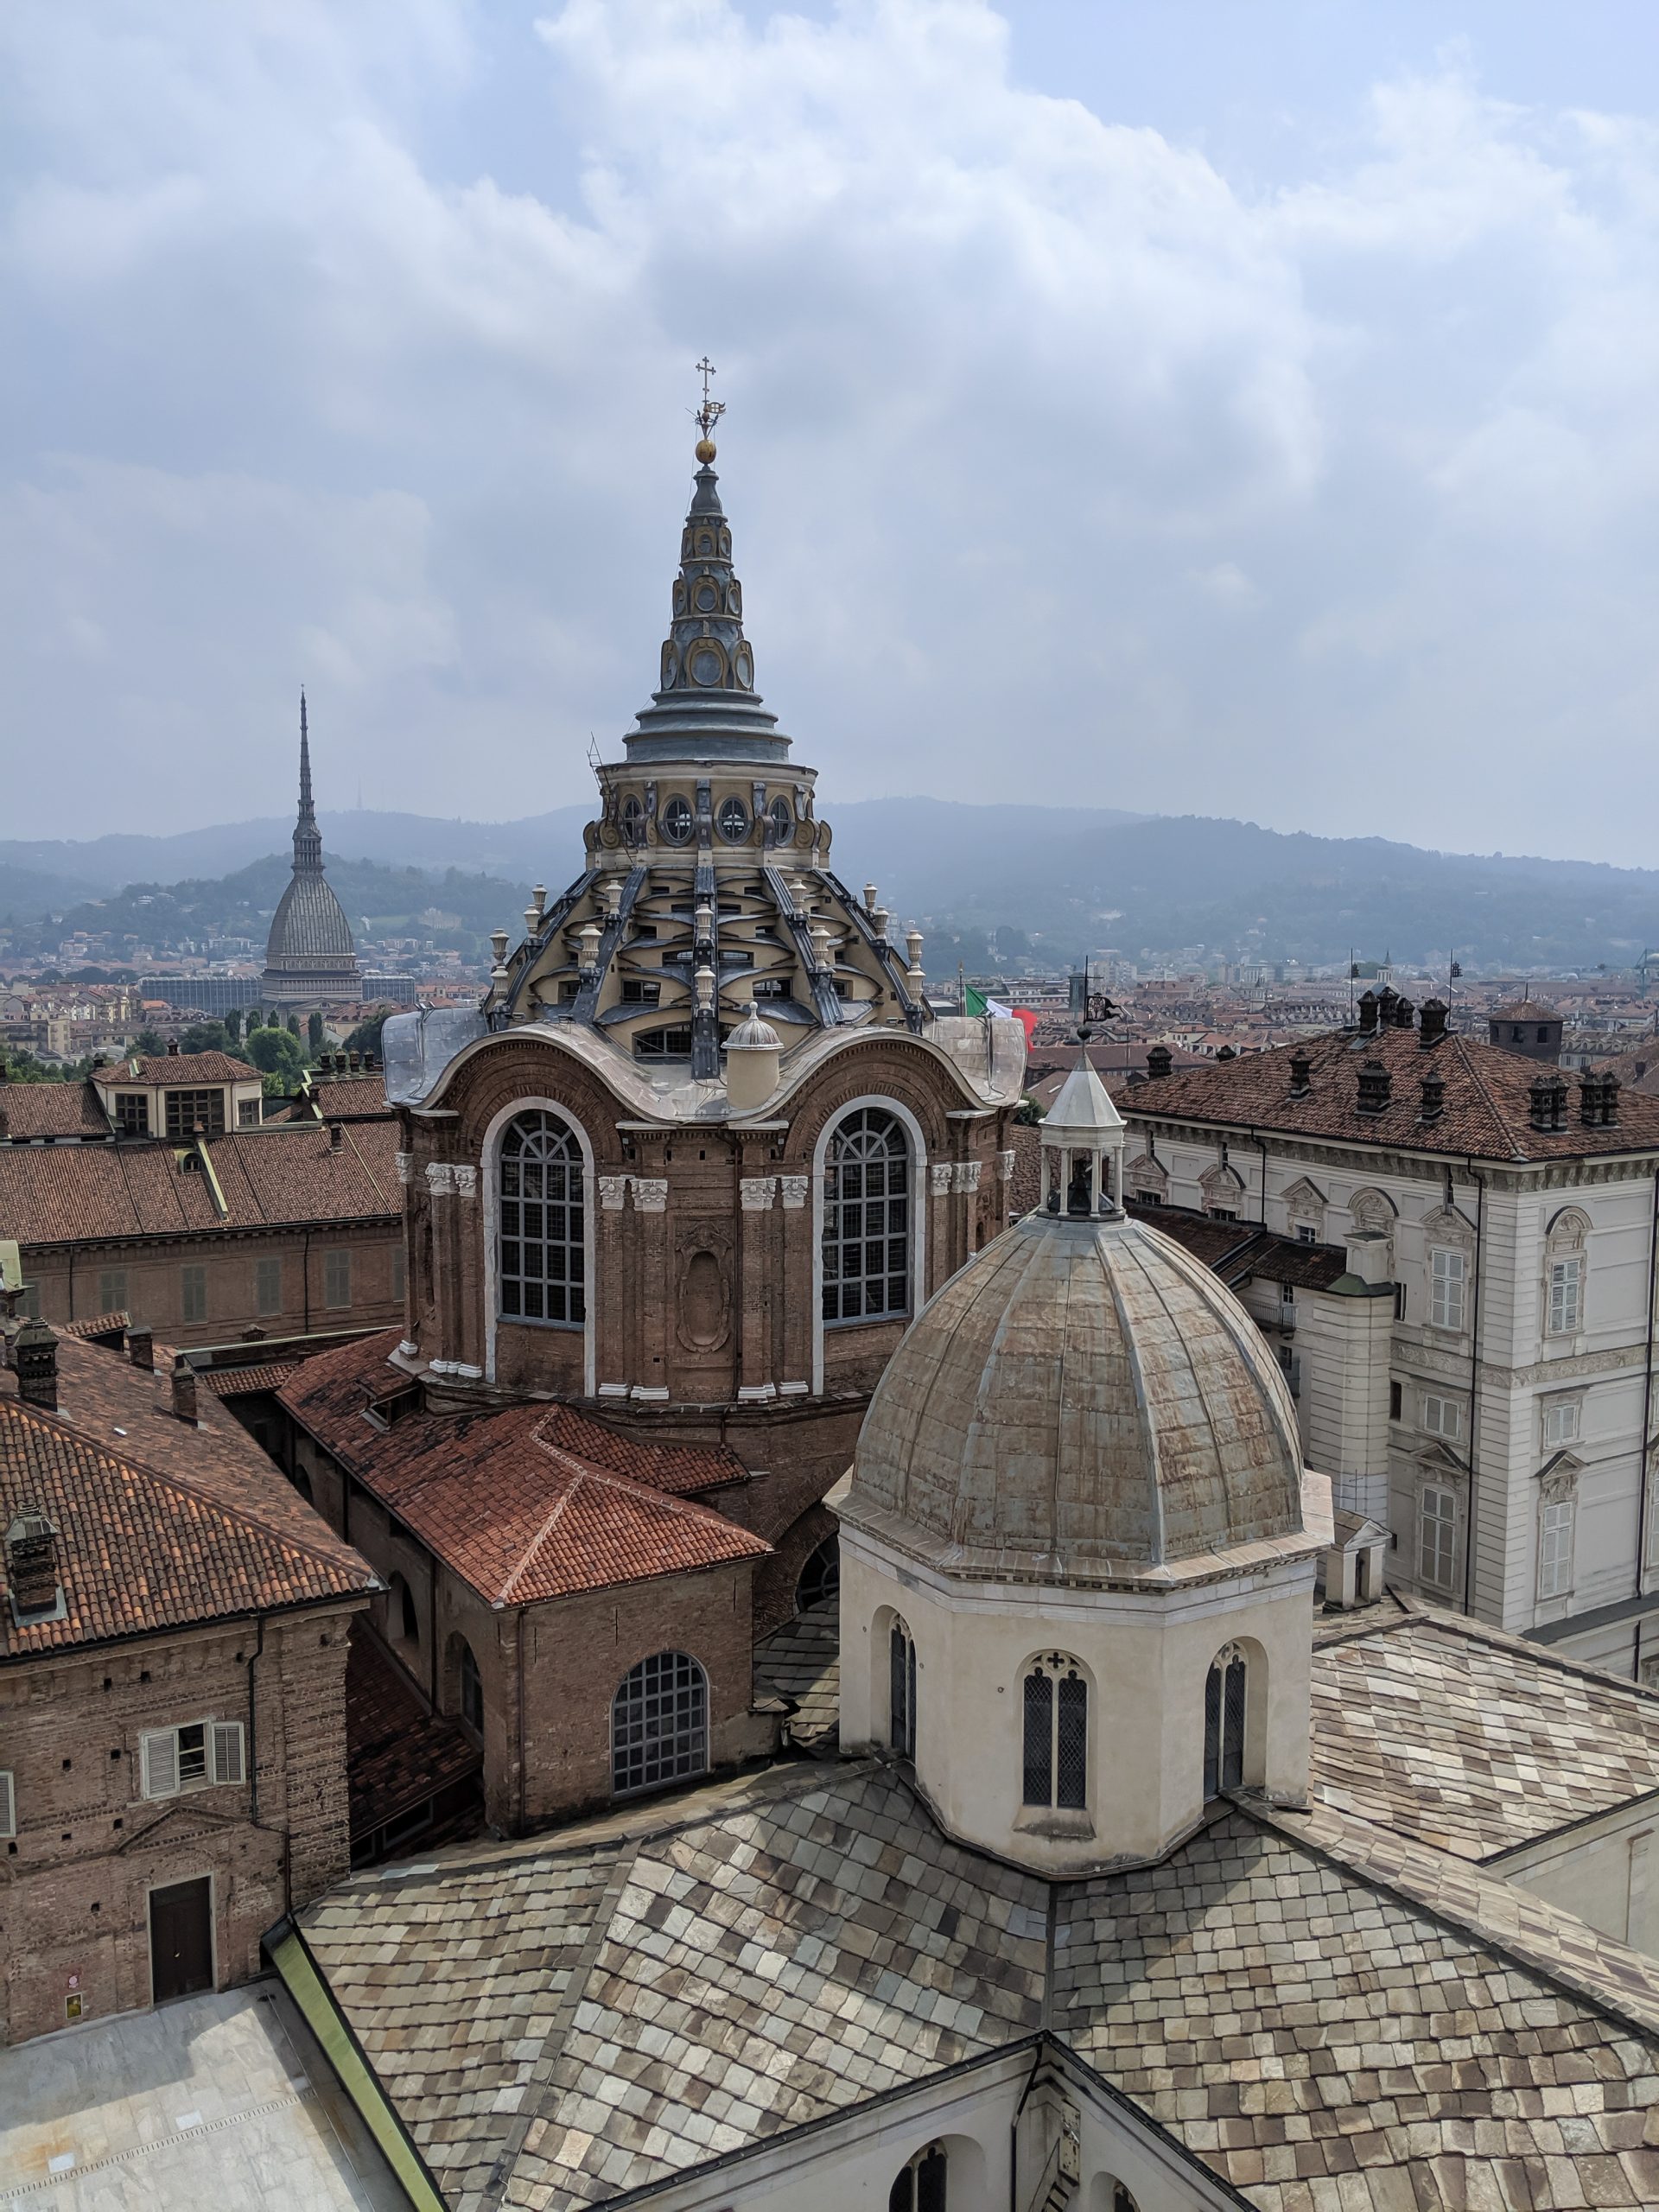 Turin Cathedral bell tower view | How to Spend 2 Days in Turin, Italy (Torino) | 2-Day Itinerary plus helpful tips | Where to stay in Turin, Things to do in Turin, the capital of the Piedmont region | #turin #torino #italy #weekendinturin #traveltips